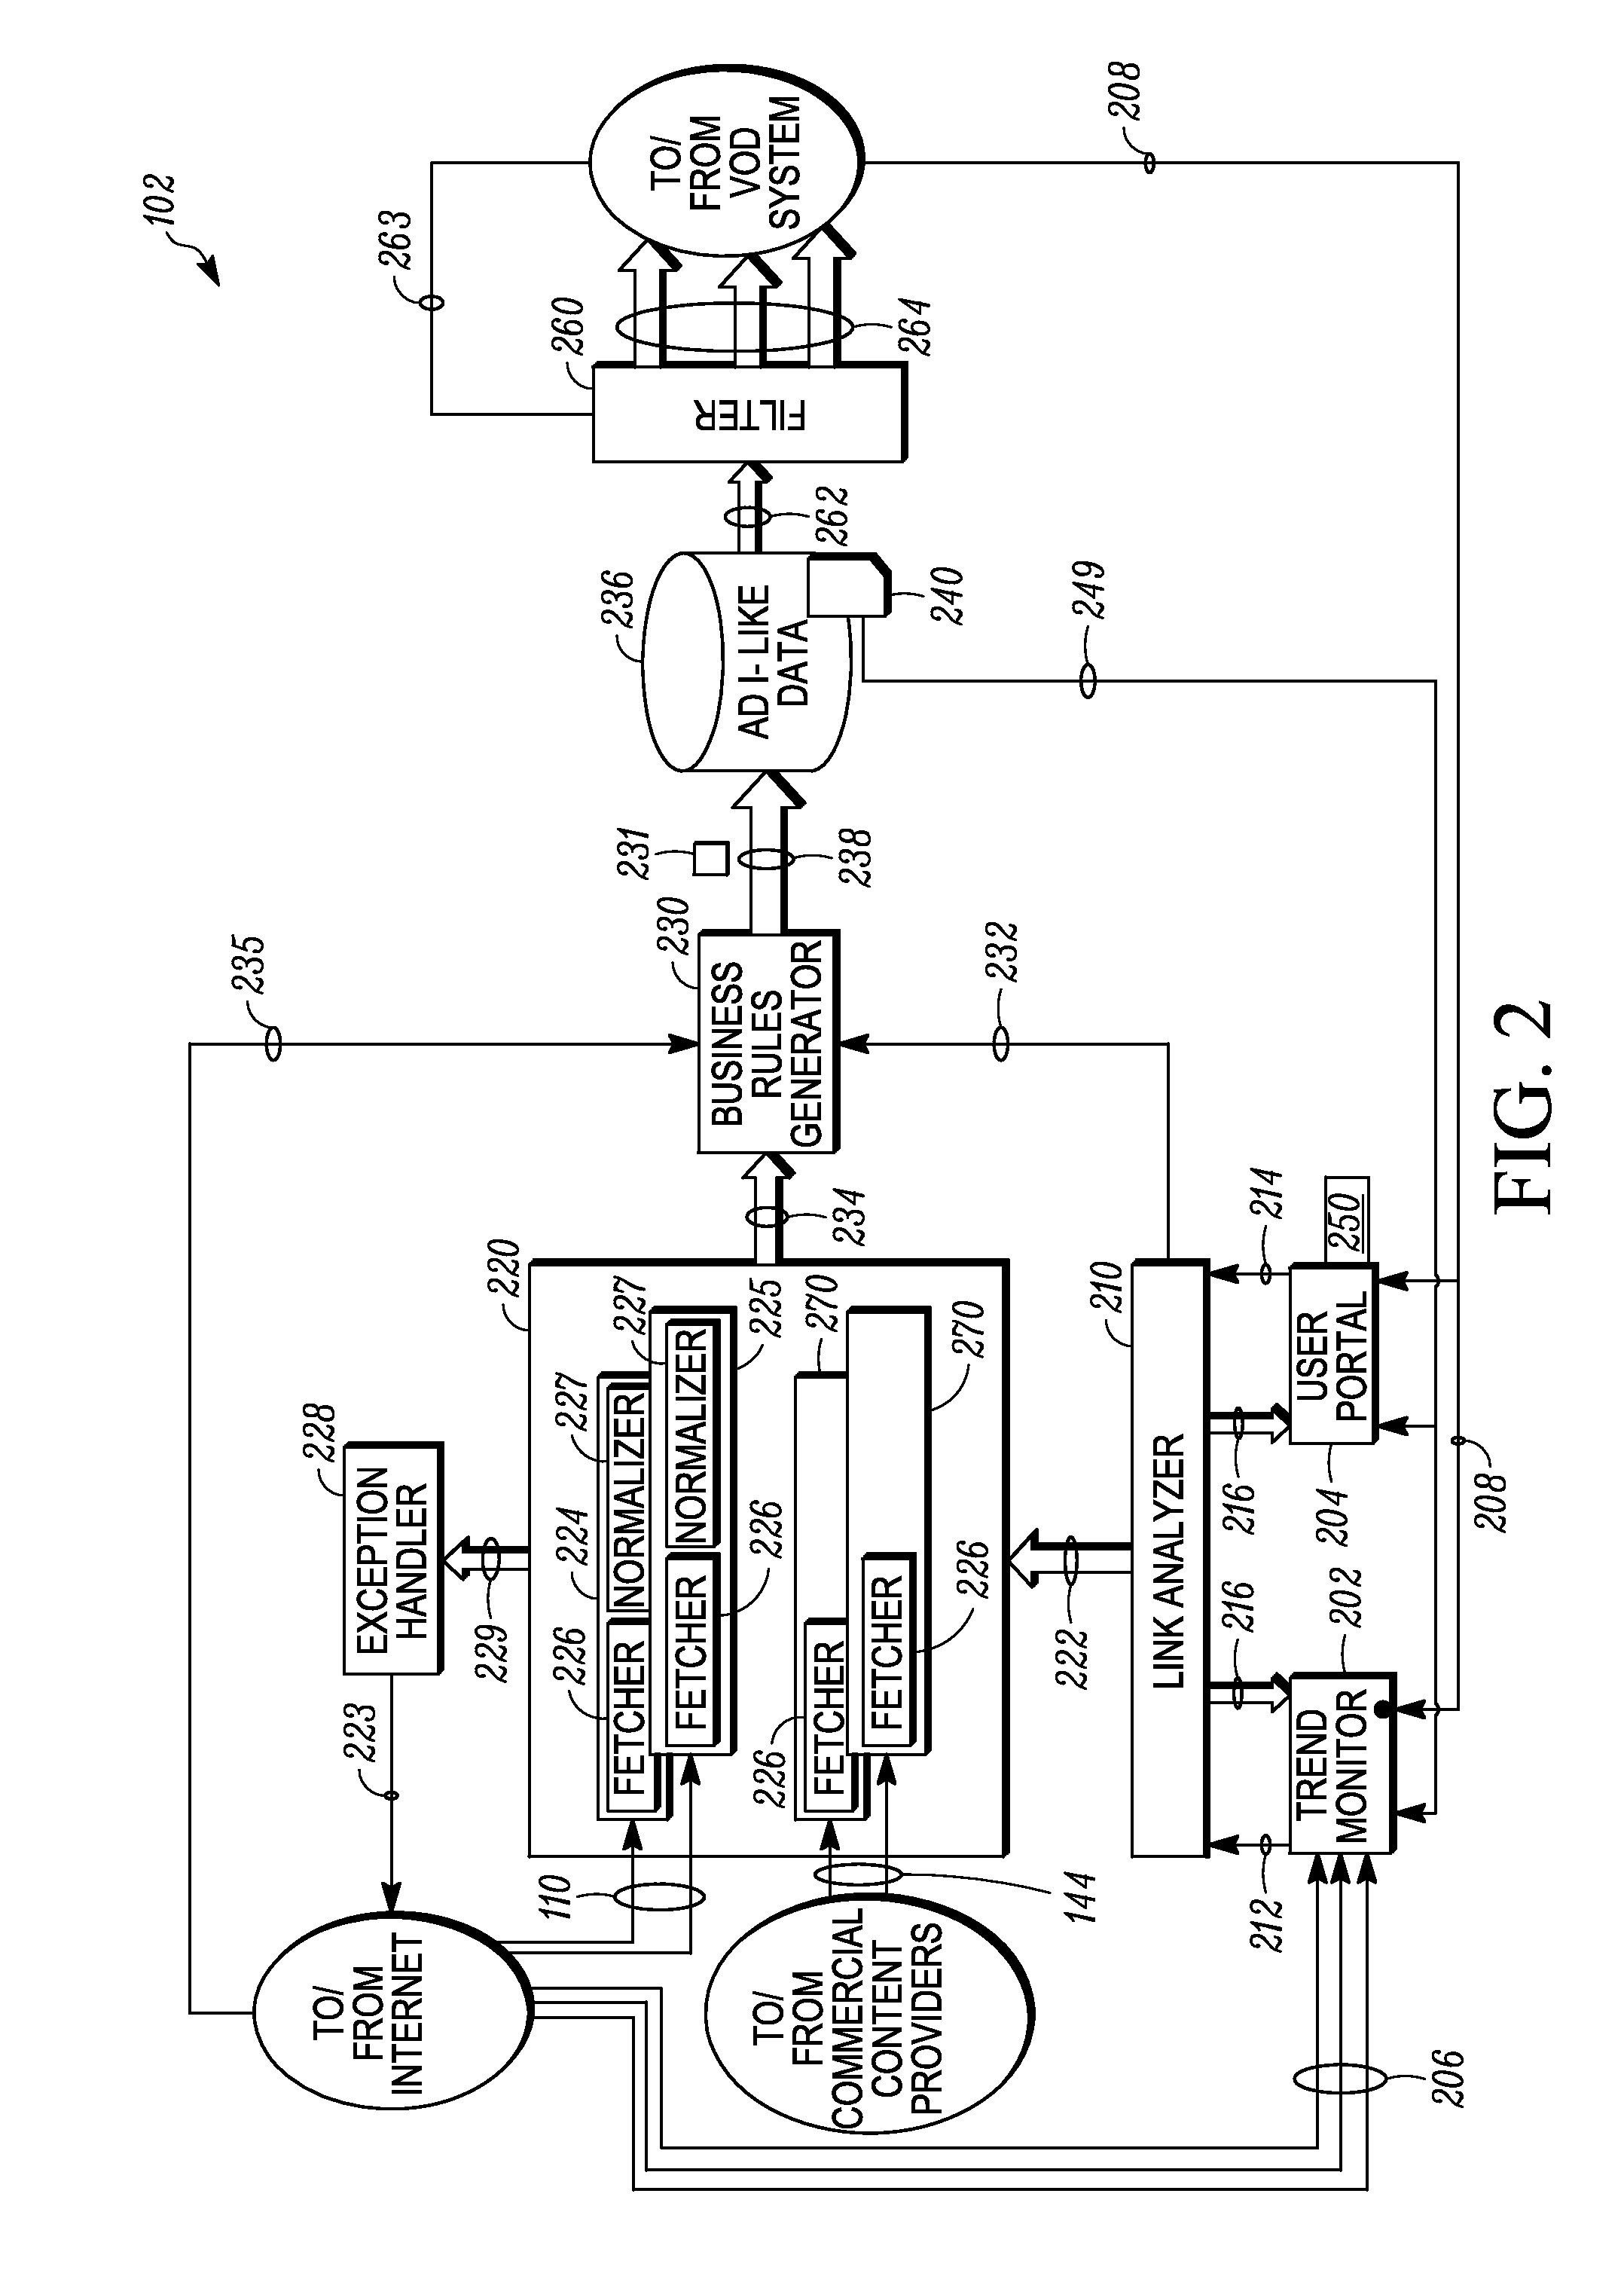 Method and system for facilitating demand-driven distribution of content